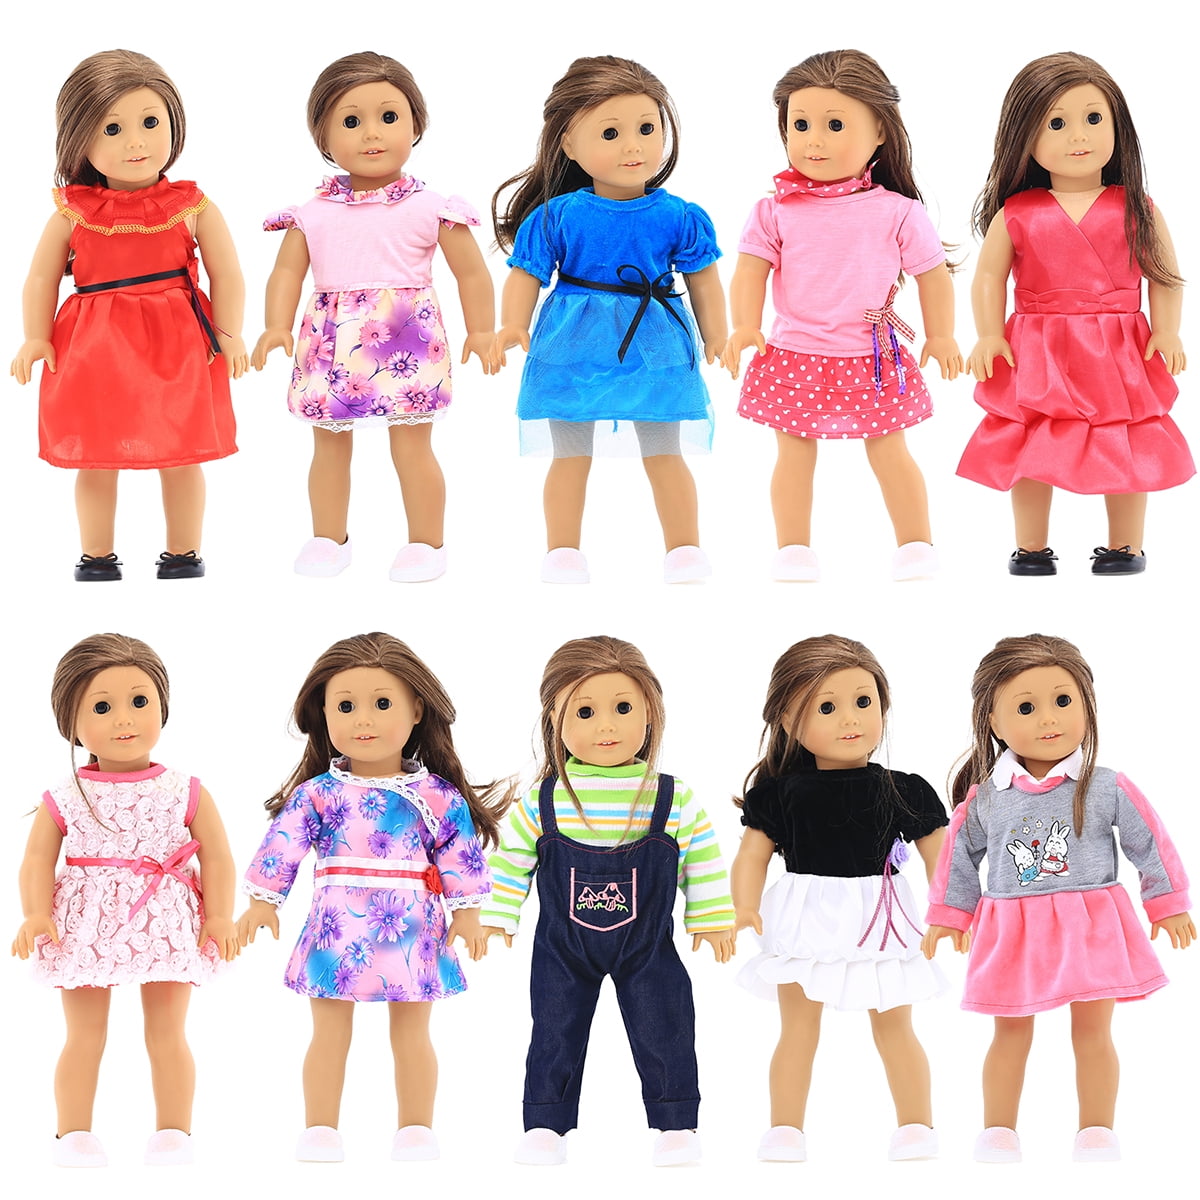 18" doll clothes-fits American Girl Generation My Life-Dress-Chevron w/Dots